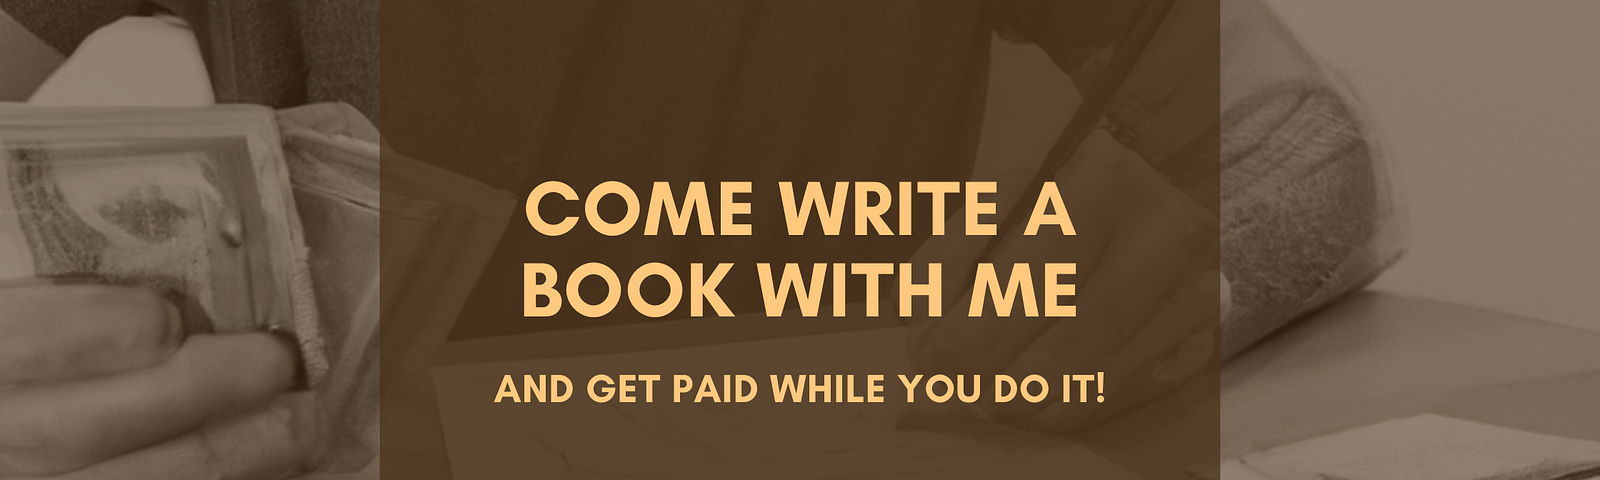 Come Write a Book With Me and Get Paid While You Do It!